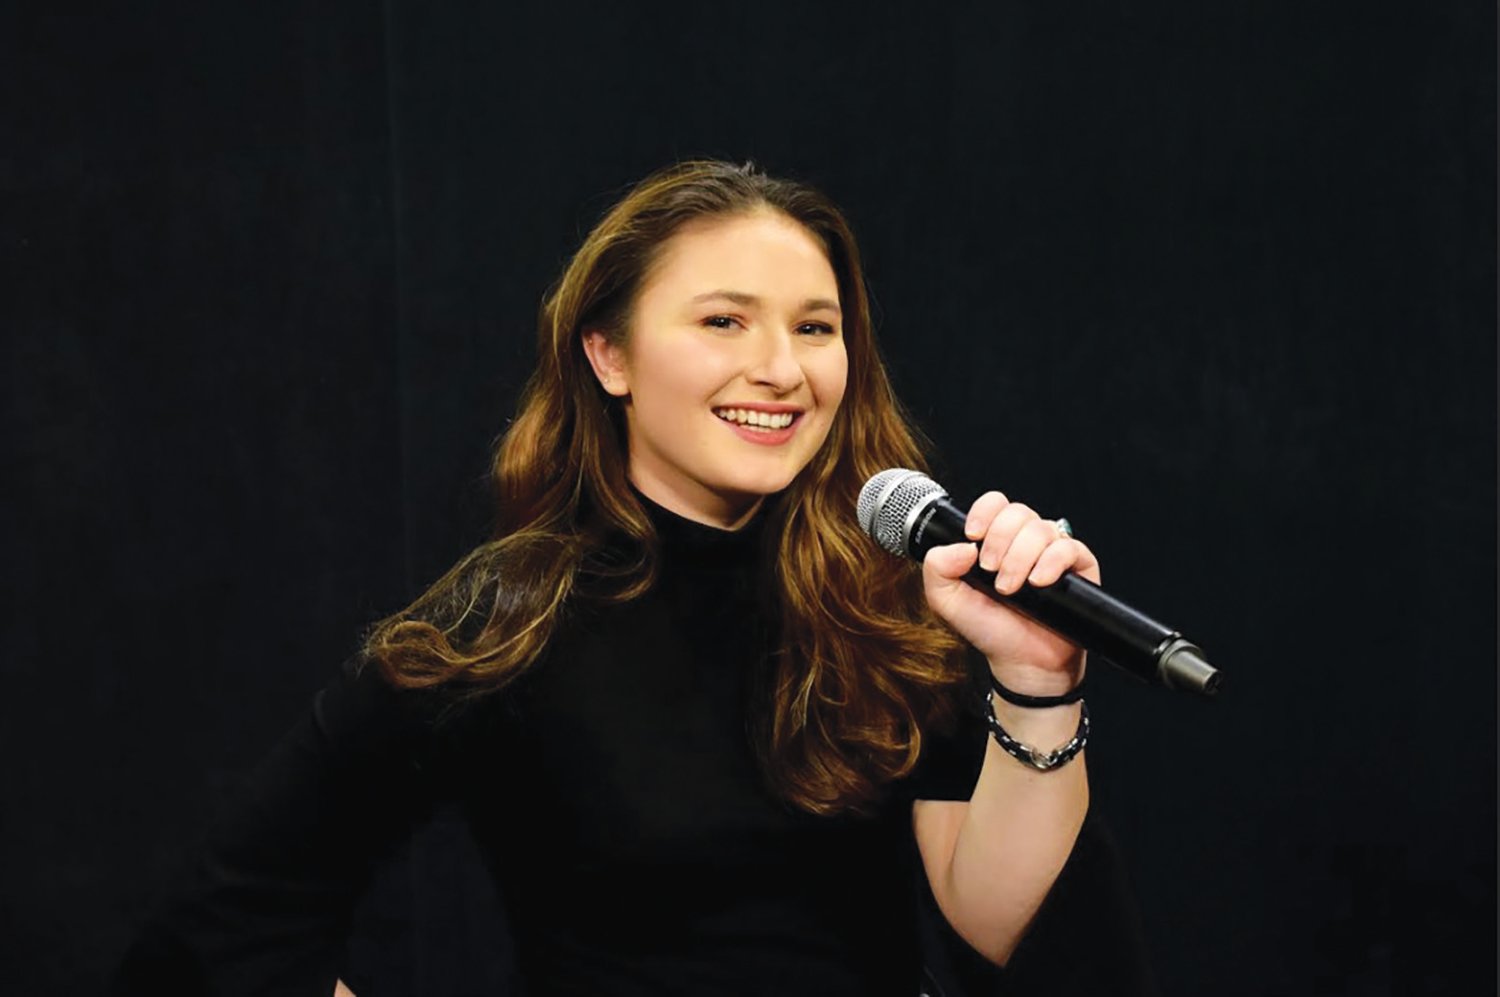 Nantucket High School graduate Anna Tornovish is in the finals for High Point University's version of the television show "The Voice," which streams on High Point's YouTube channel tonight.